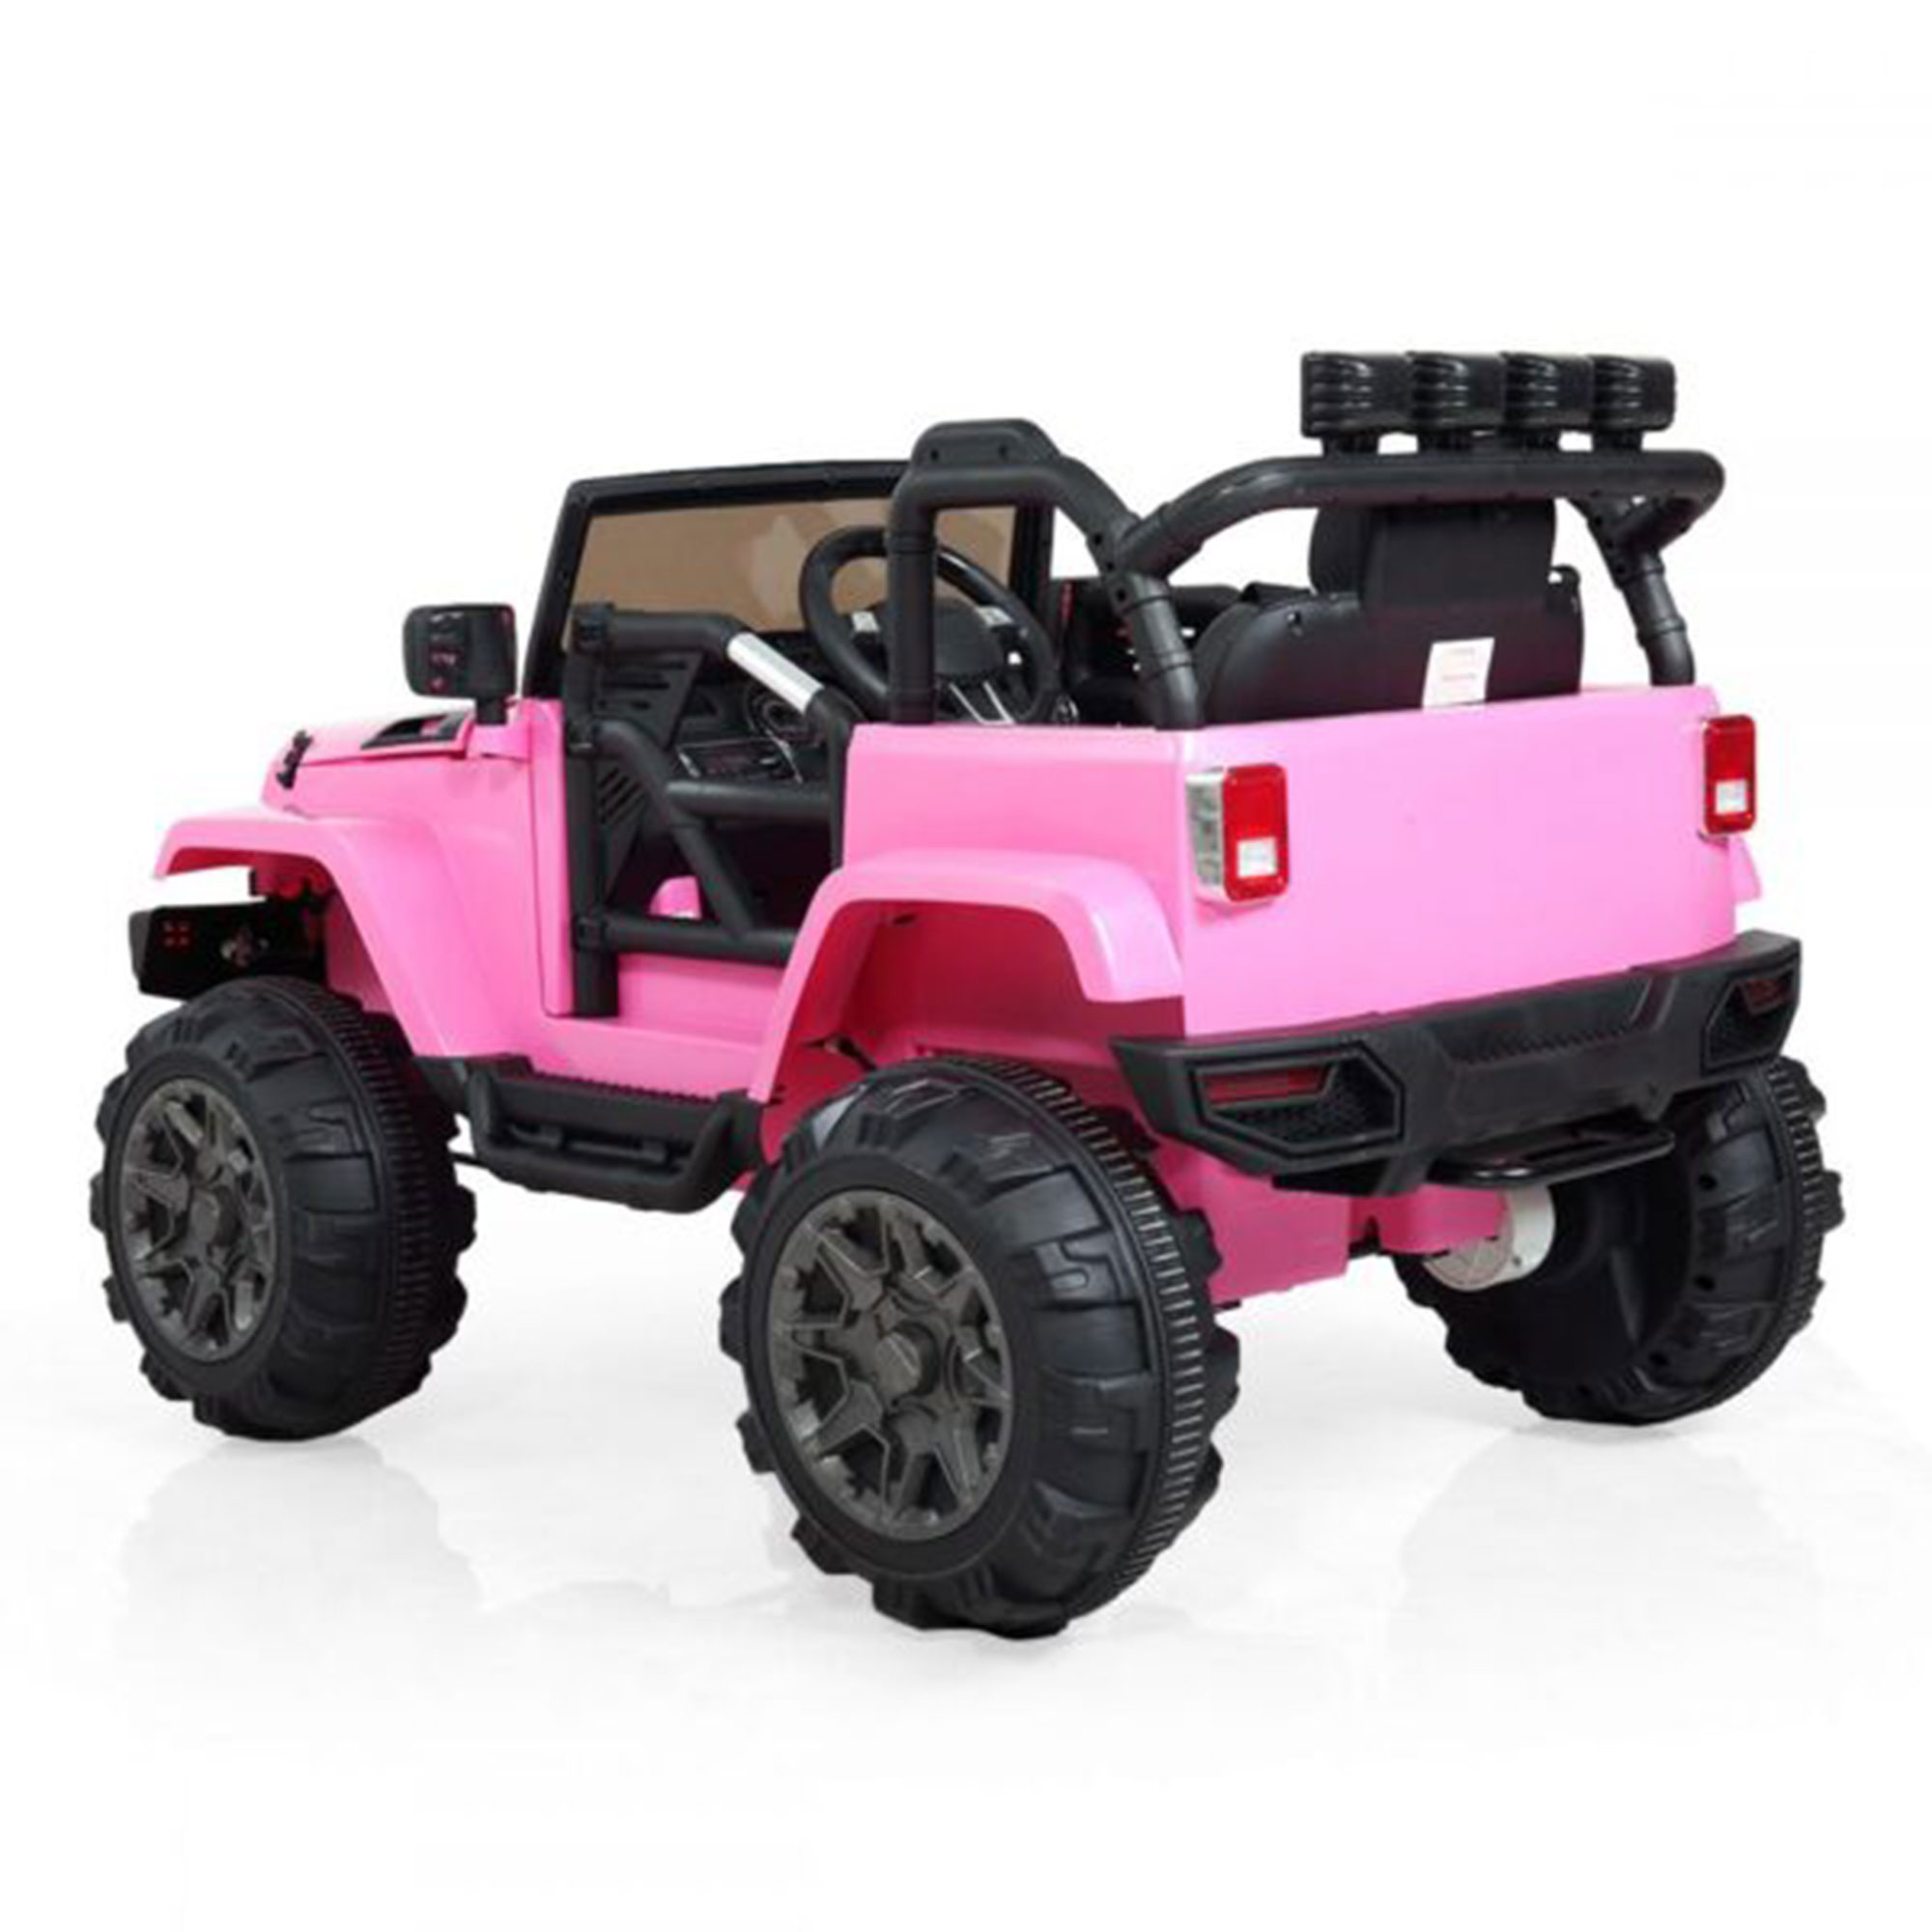 TOBBI 12V Kids Electric Battery Powered Jeep Wrangler Ride On Toy w/ Remote - image 3 of 12